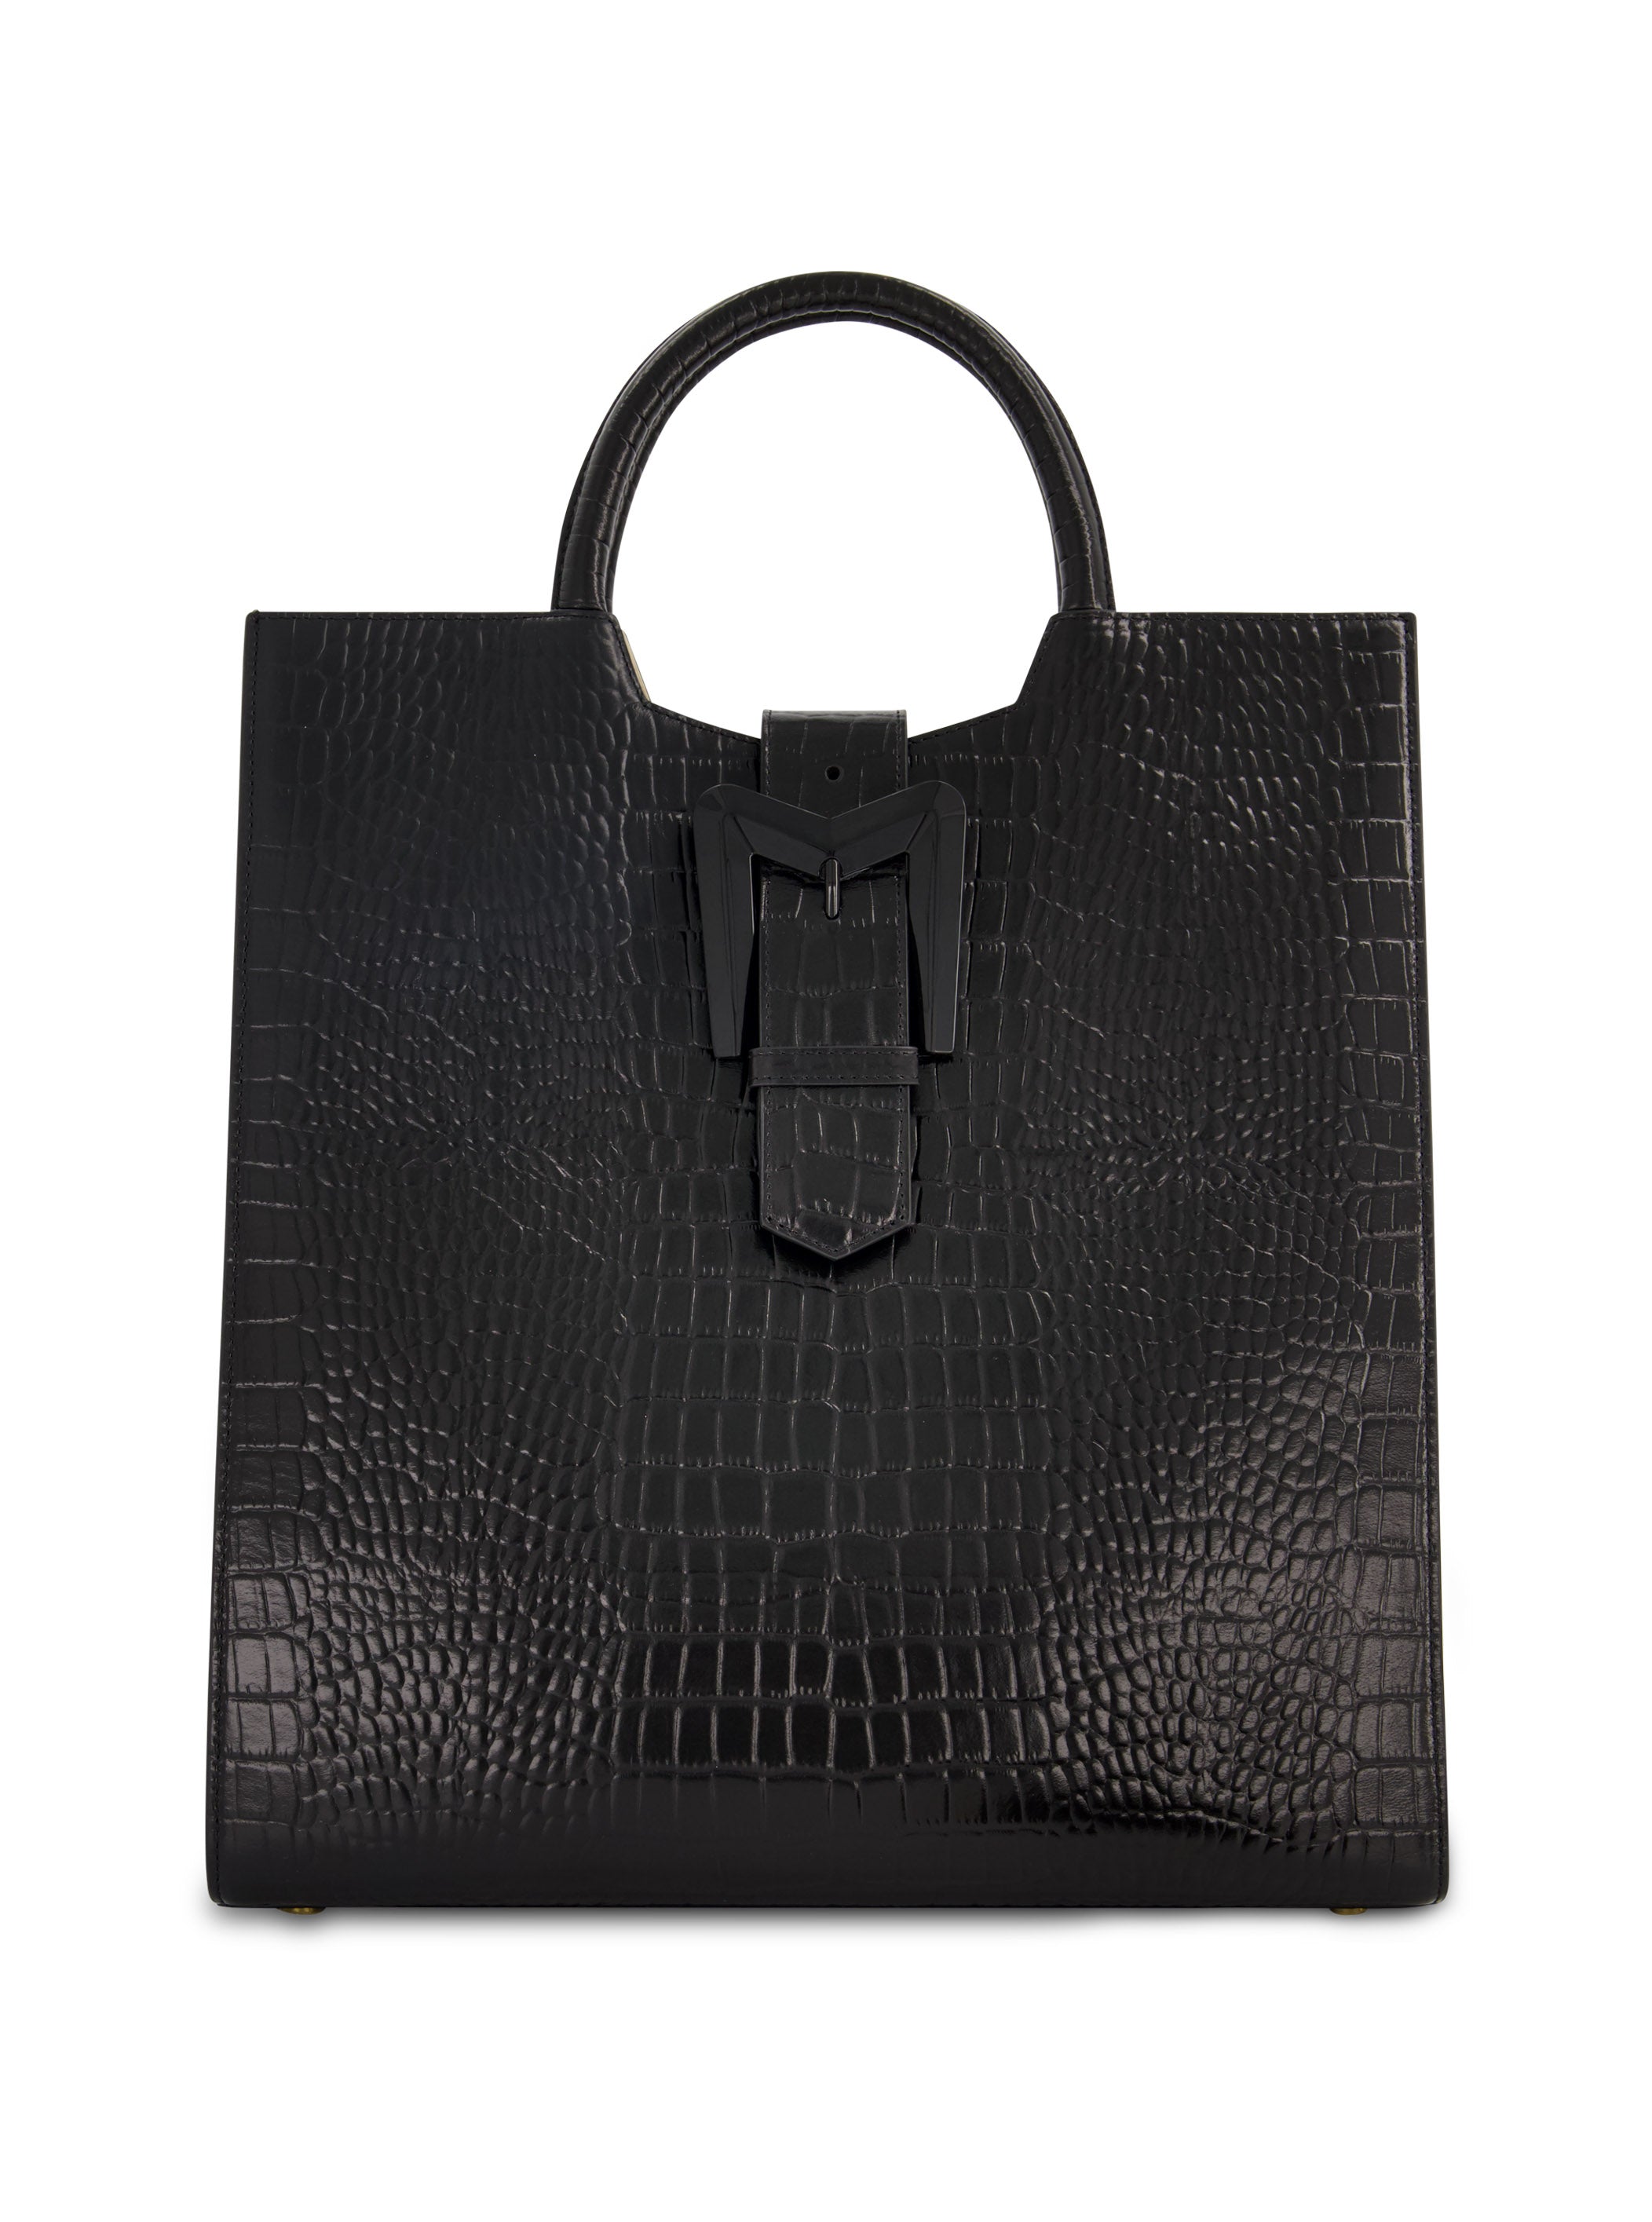 Buckled Maxi Croco Black Leather Tote Bag with Detachable Strap